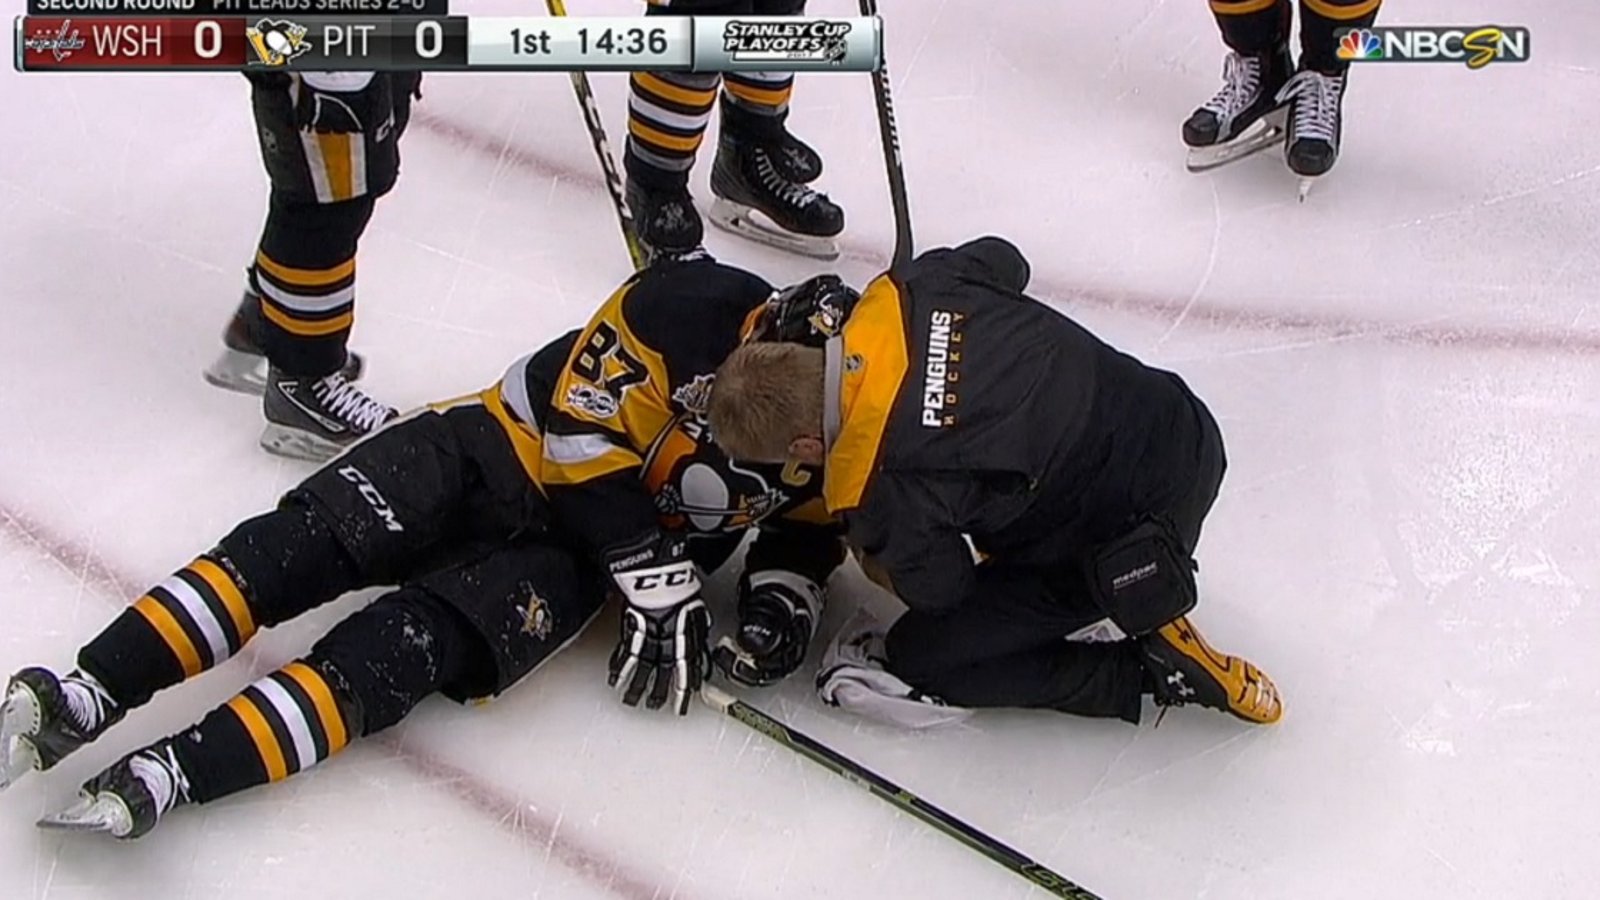 Breaking: Second angle may show a second injury to Sidney Crosby.